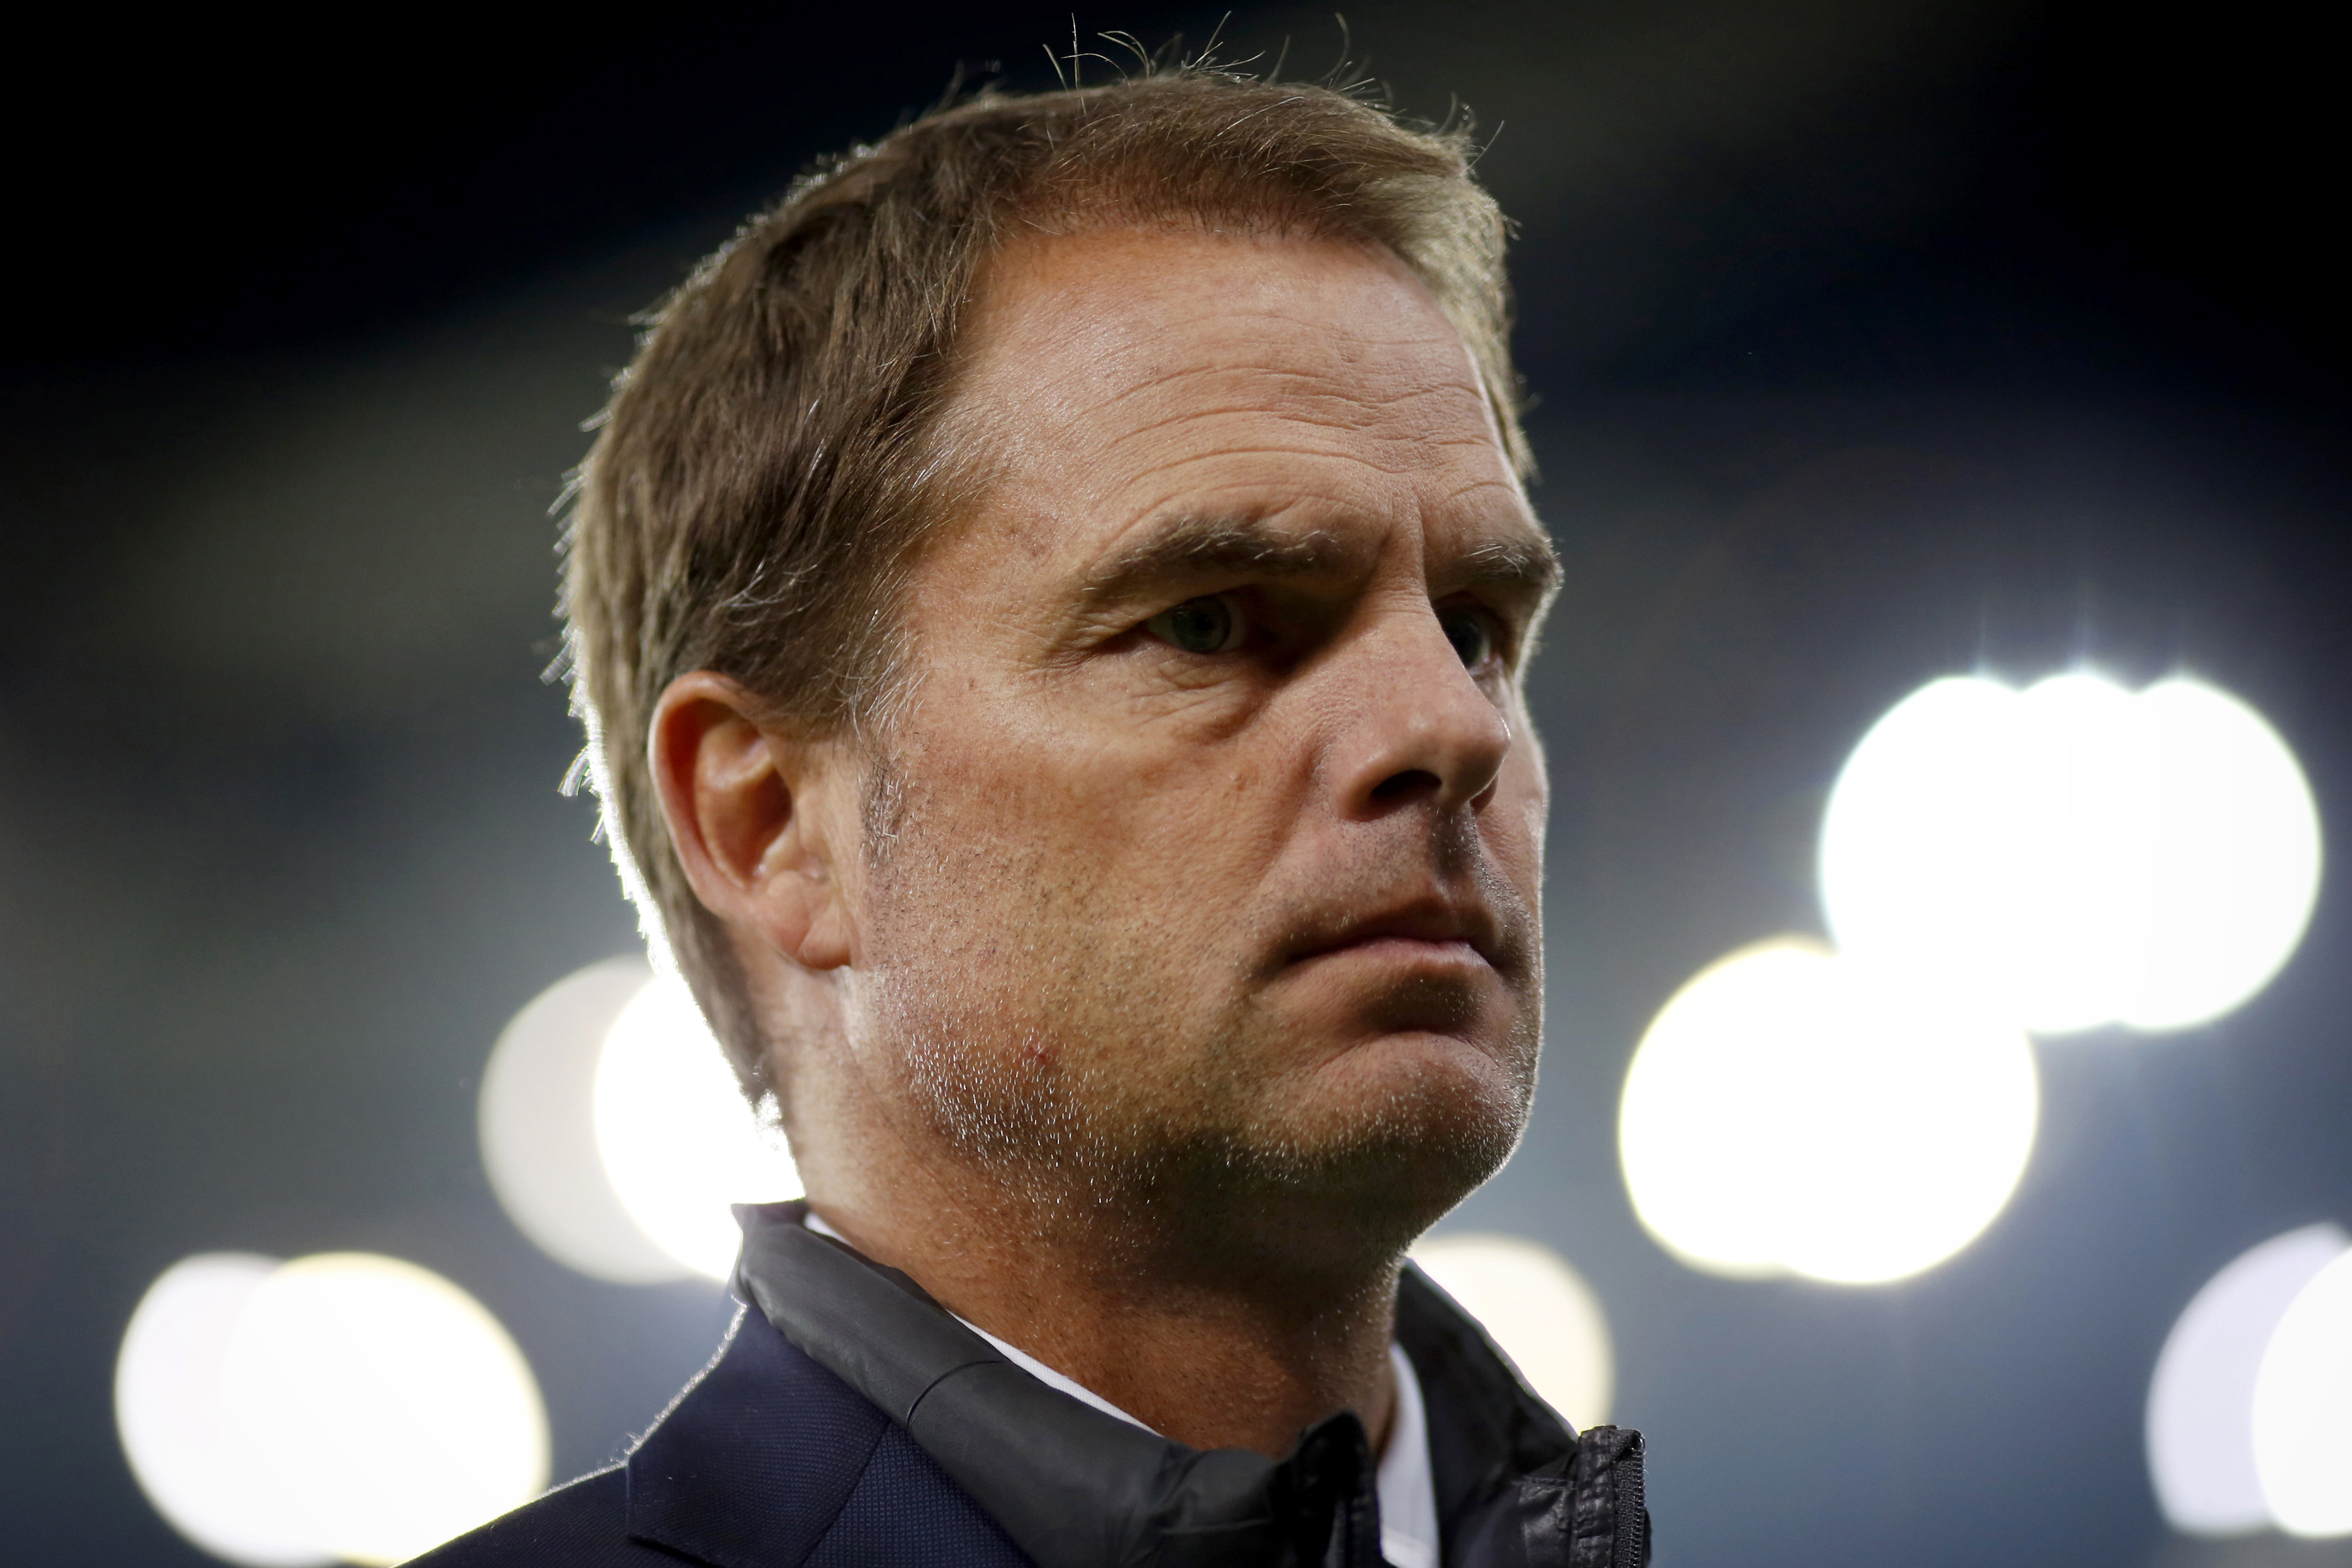 Ronald De Boer: “Frank is disappointed”